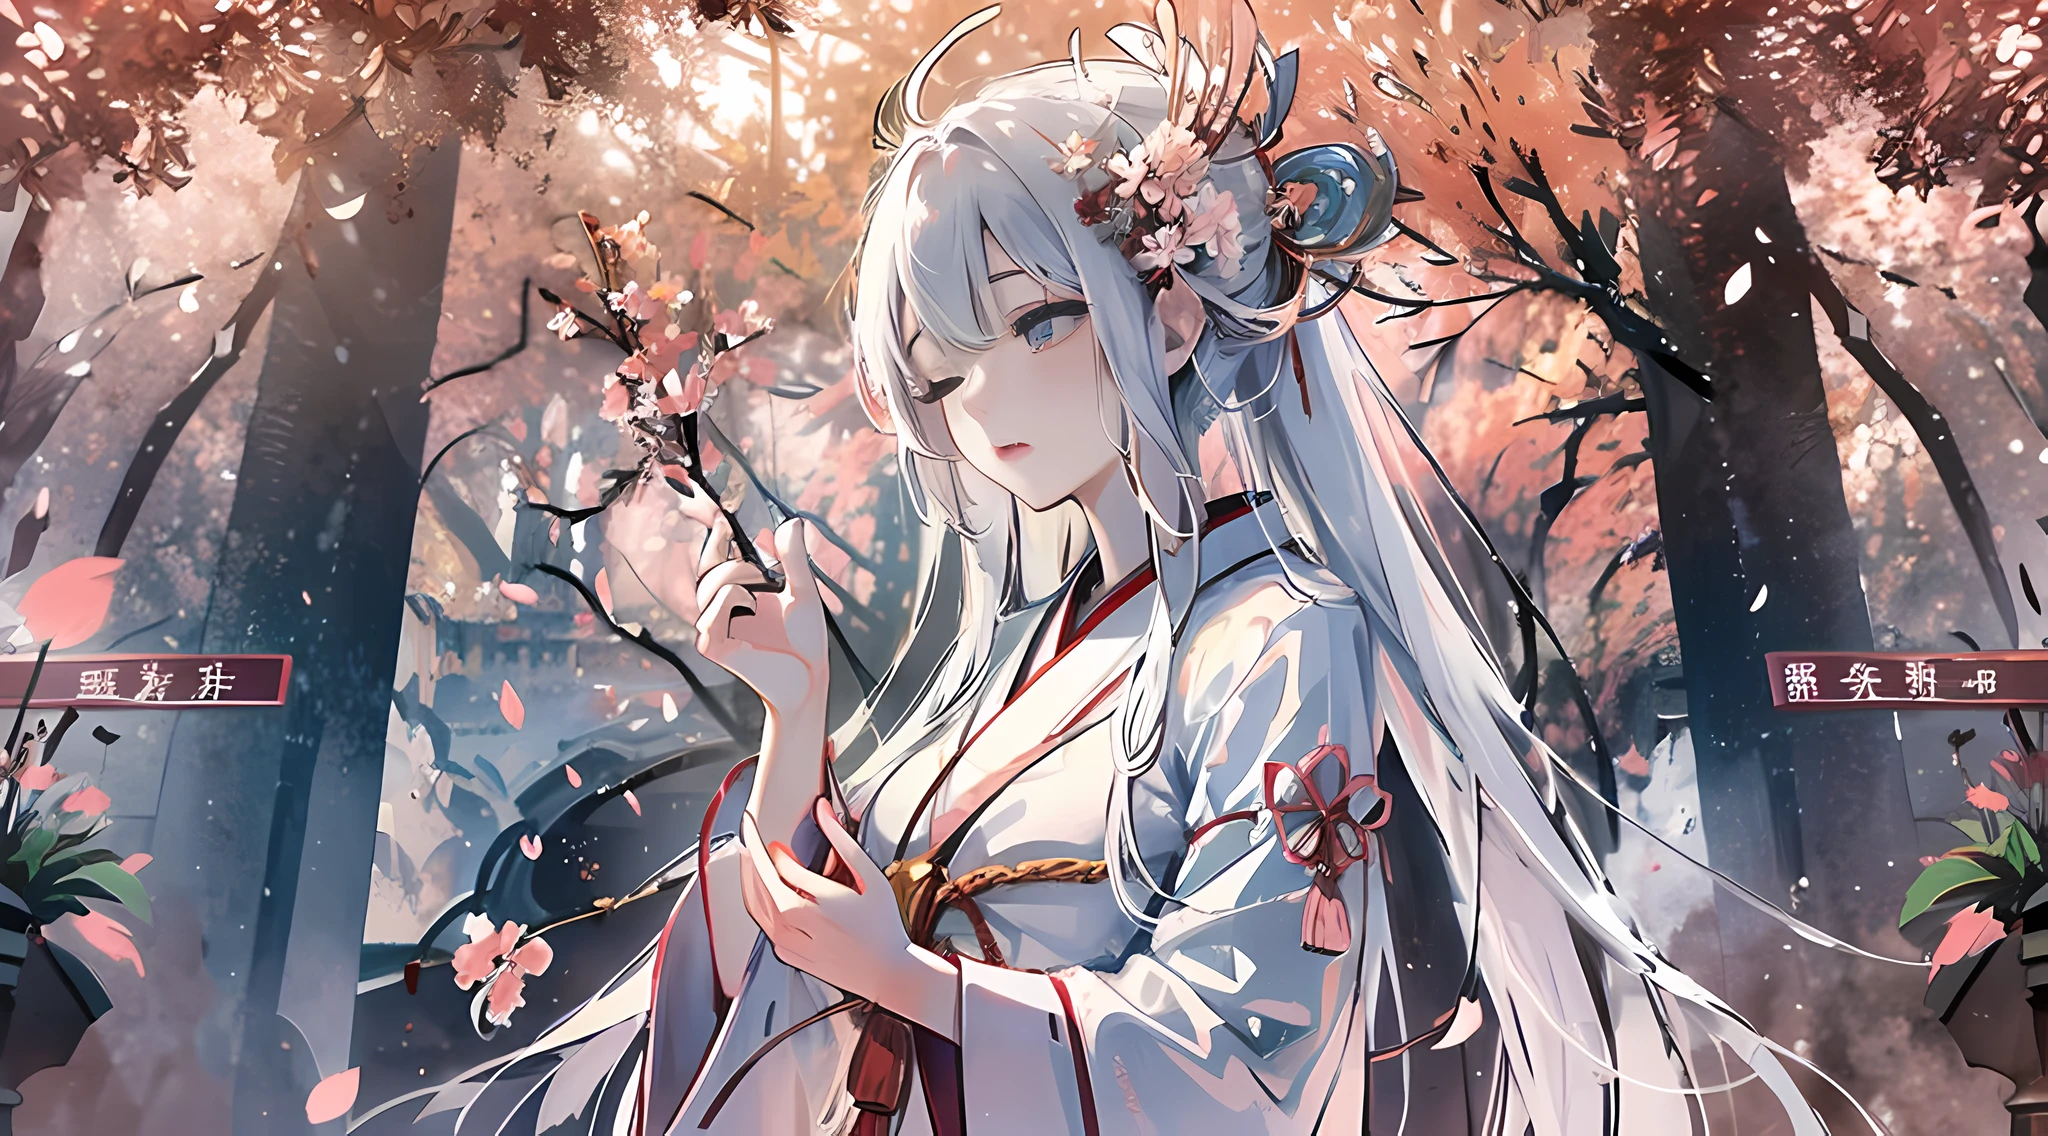 white-haired, Japanese shrine maiden, shrine, prayer, cherry blossoms, graceful, serene, flowing white robe, spiritual connection, grace, reverence, sacred space, incense, spiritual ambiance, hands clasped, eyes closed, deep concentration, devotion, belief, delicate, drifting, breeze, pink petals, poetic, ephemeral, transient, beauty, presence, tranquility, spiritual connection, earthly realm, divine, conduit, humans, sacred, enchanting, harmonious, profound, reverence.